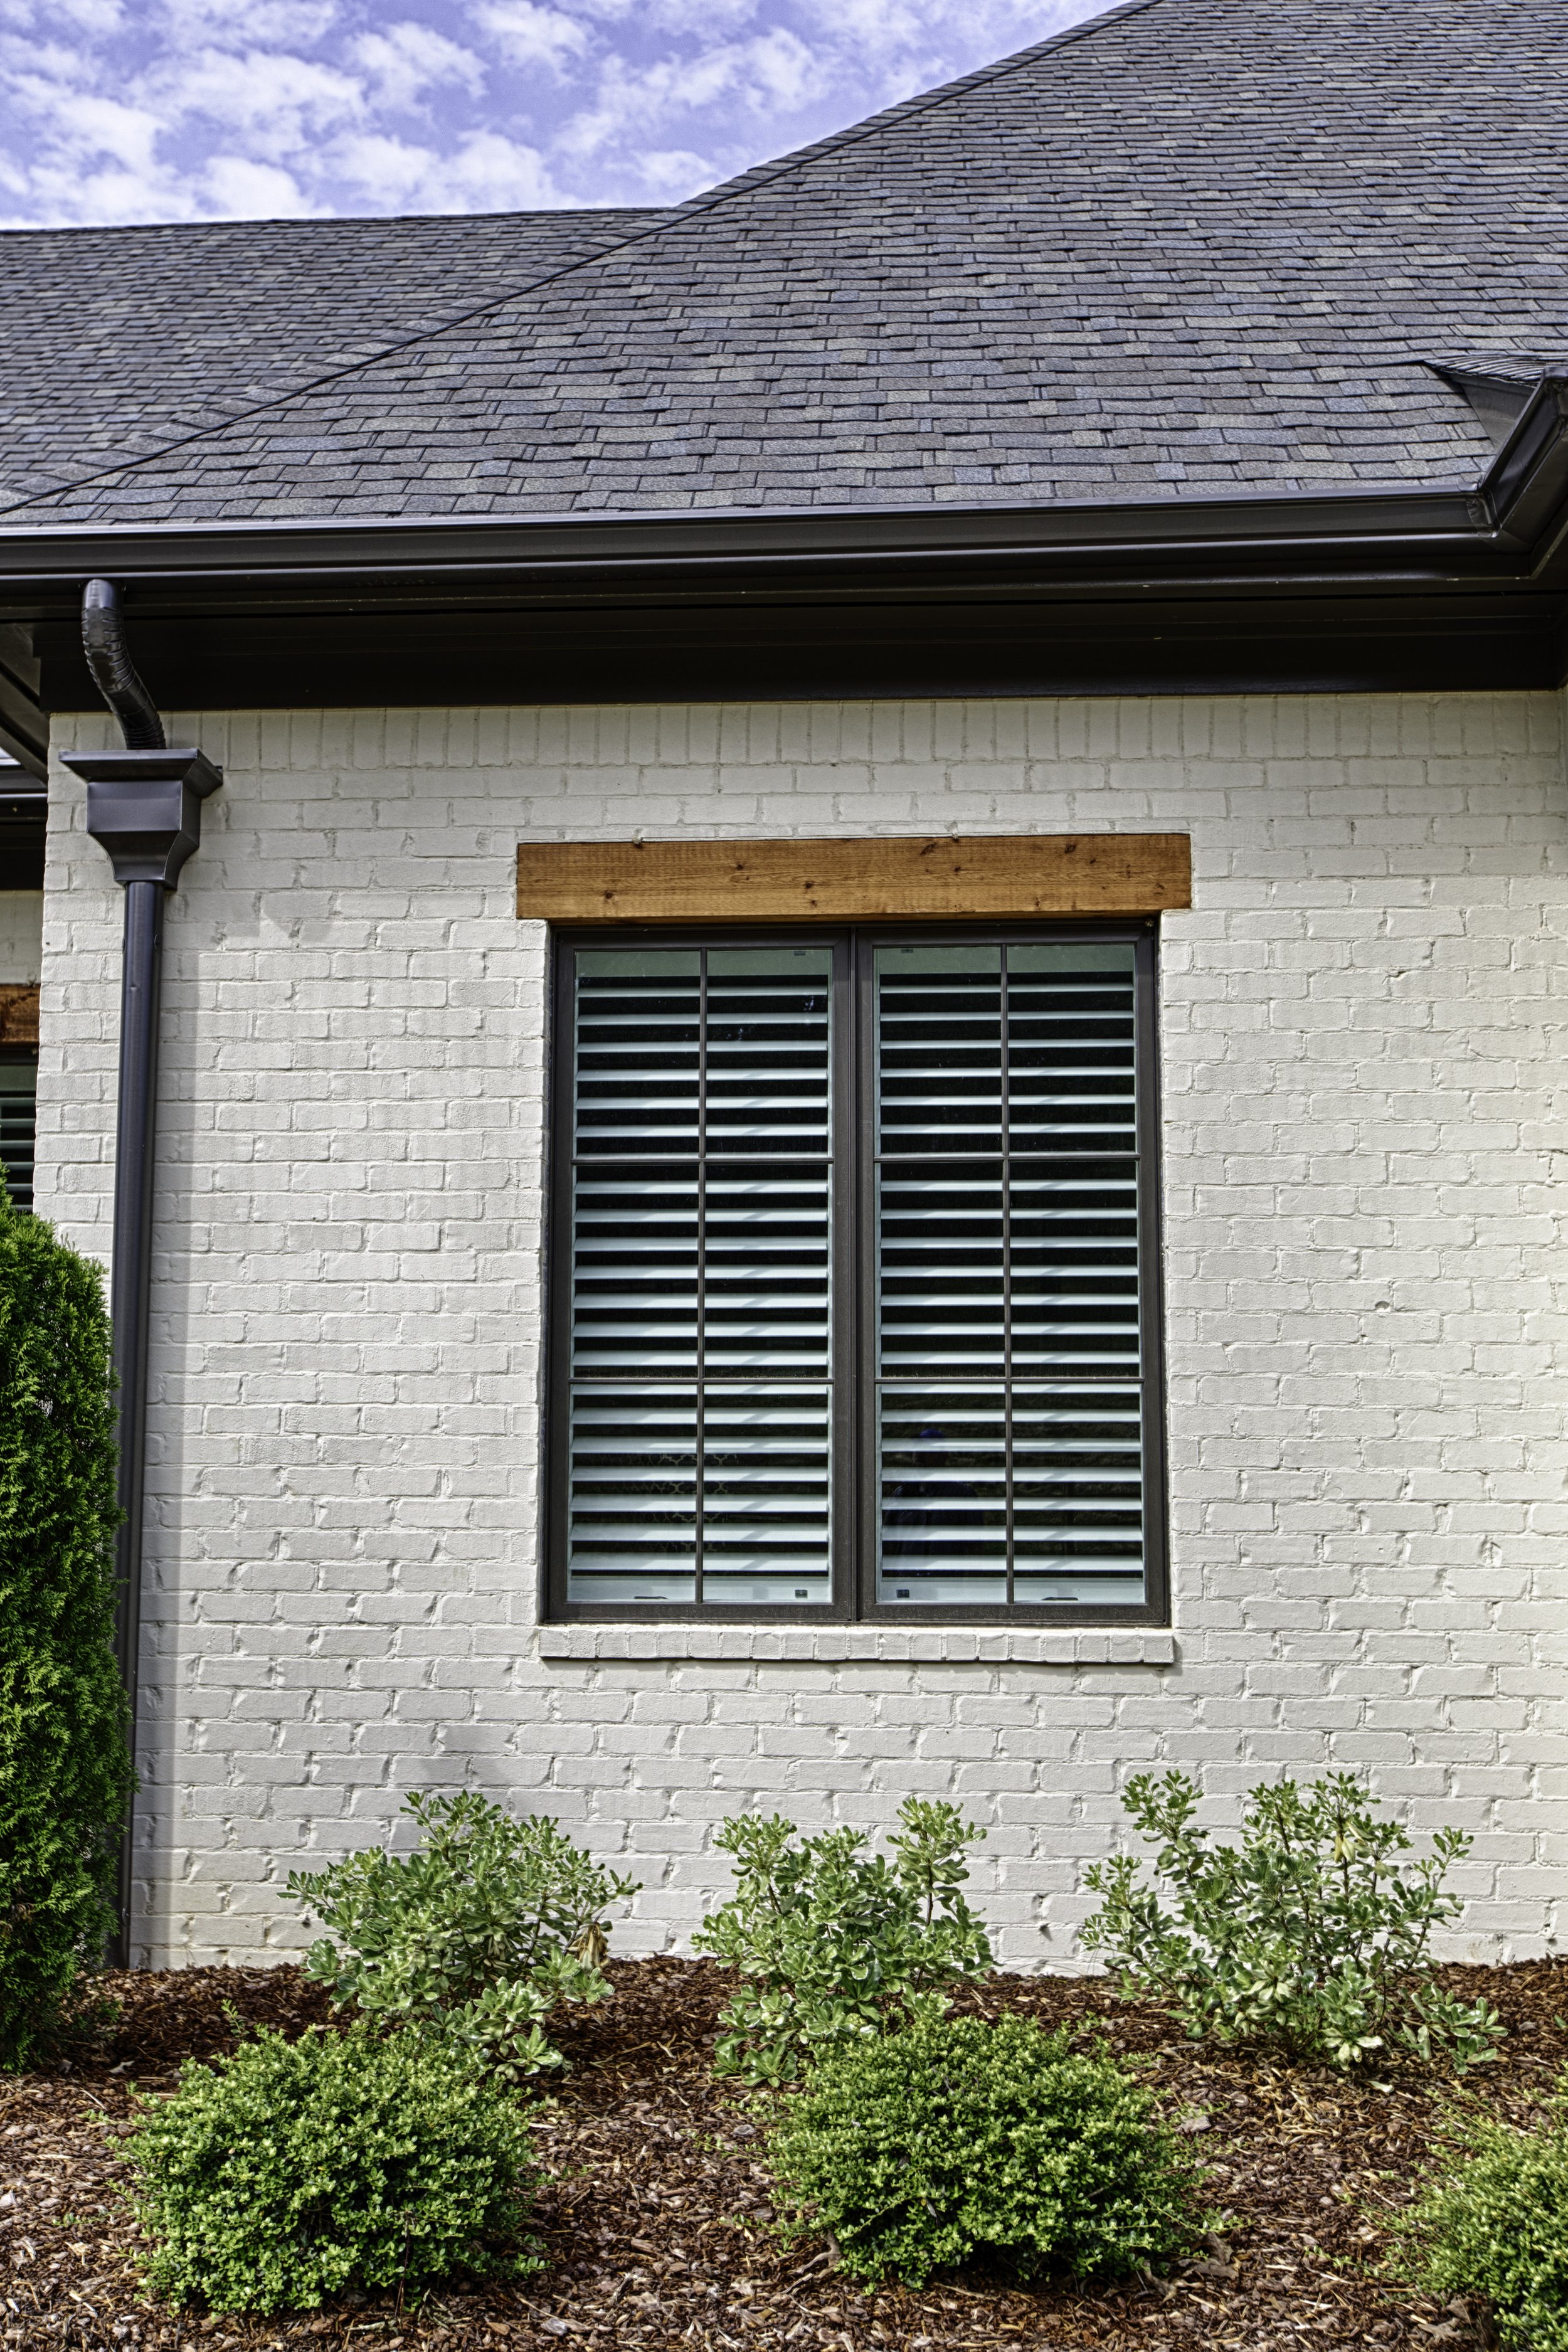 Black replacement windows on a white-washed brick home in Alabama